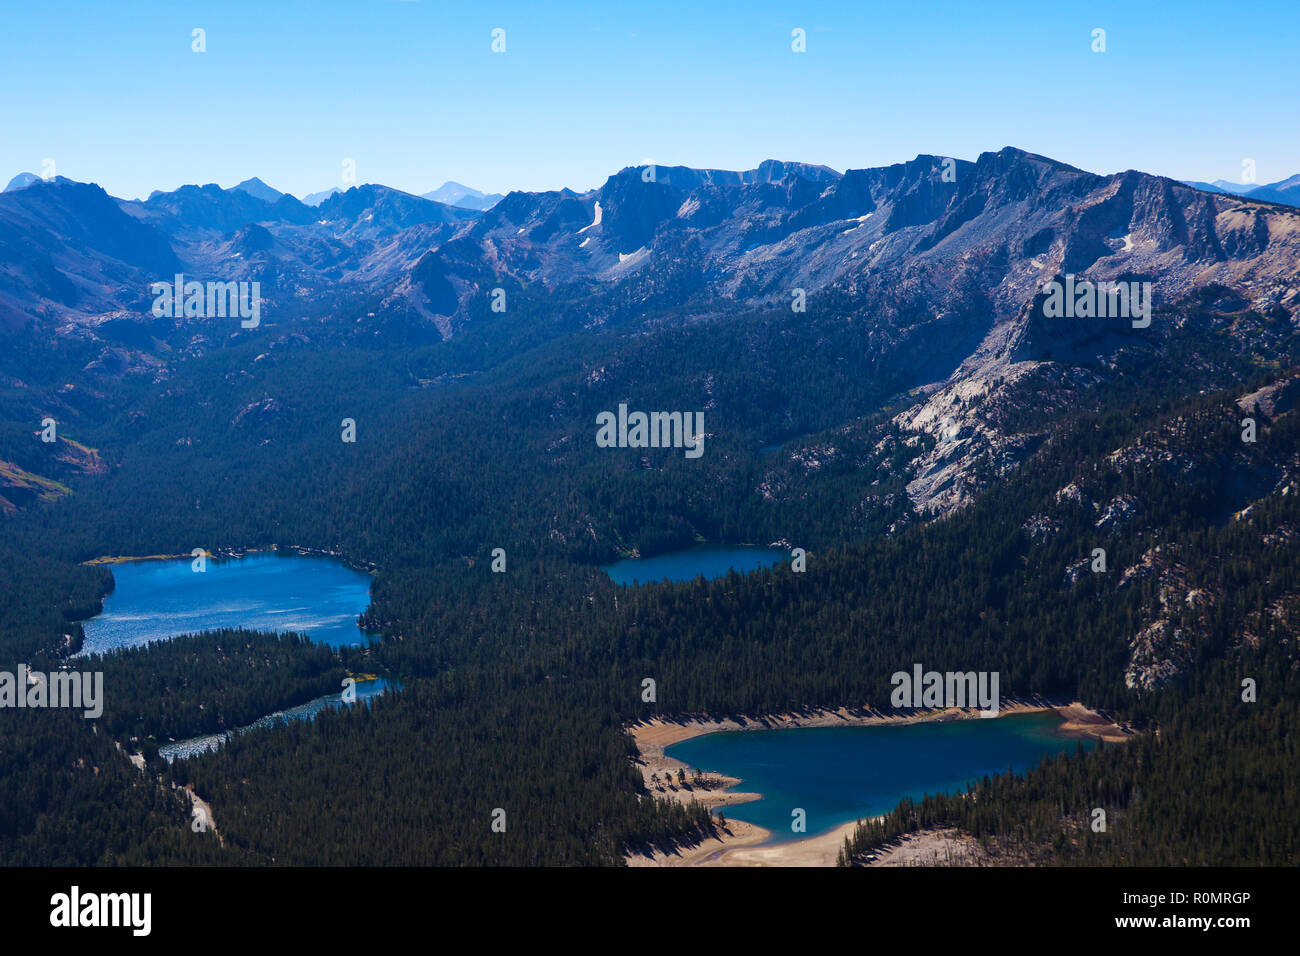 View of the three lakes in the mountains on a sunny day. Stock Photo